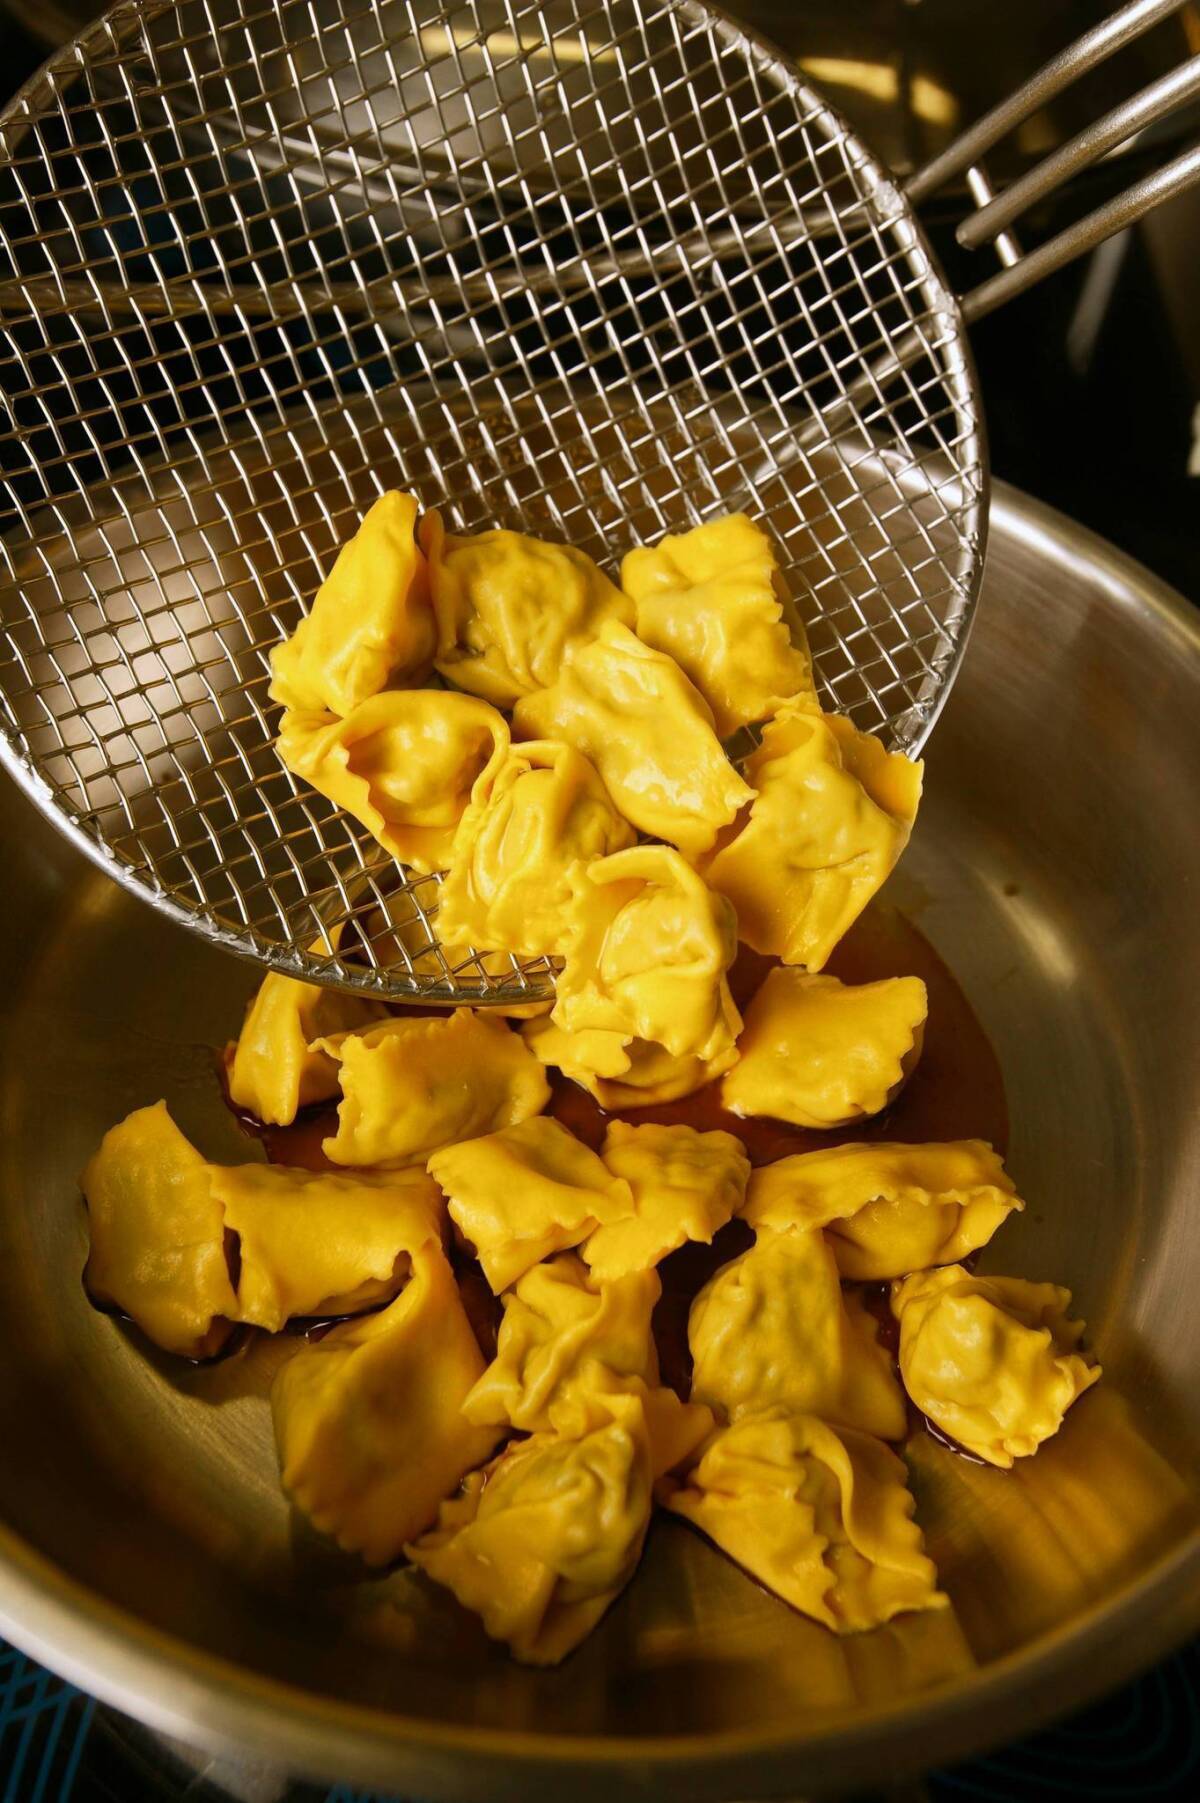 A goal for this year is learning how to fold agnolotti.